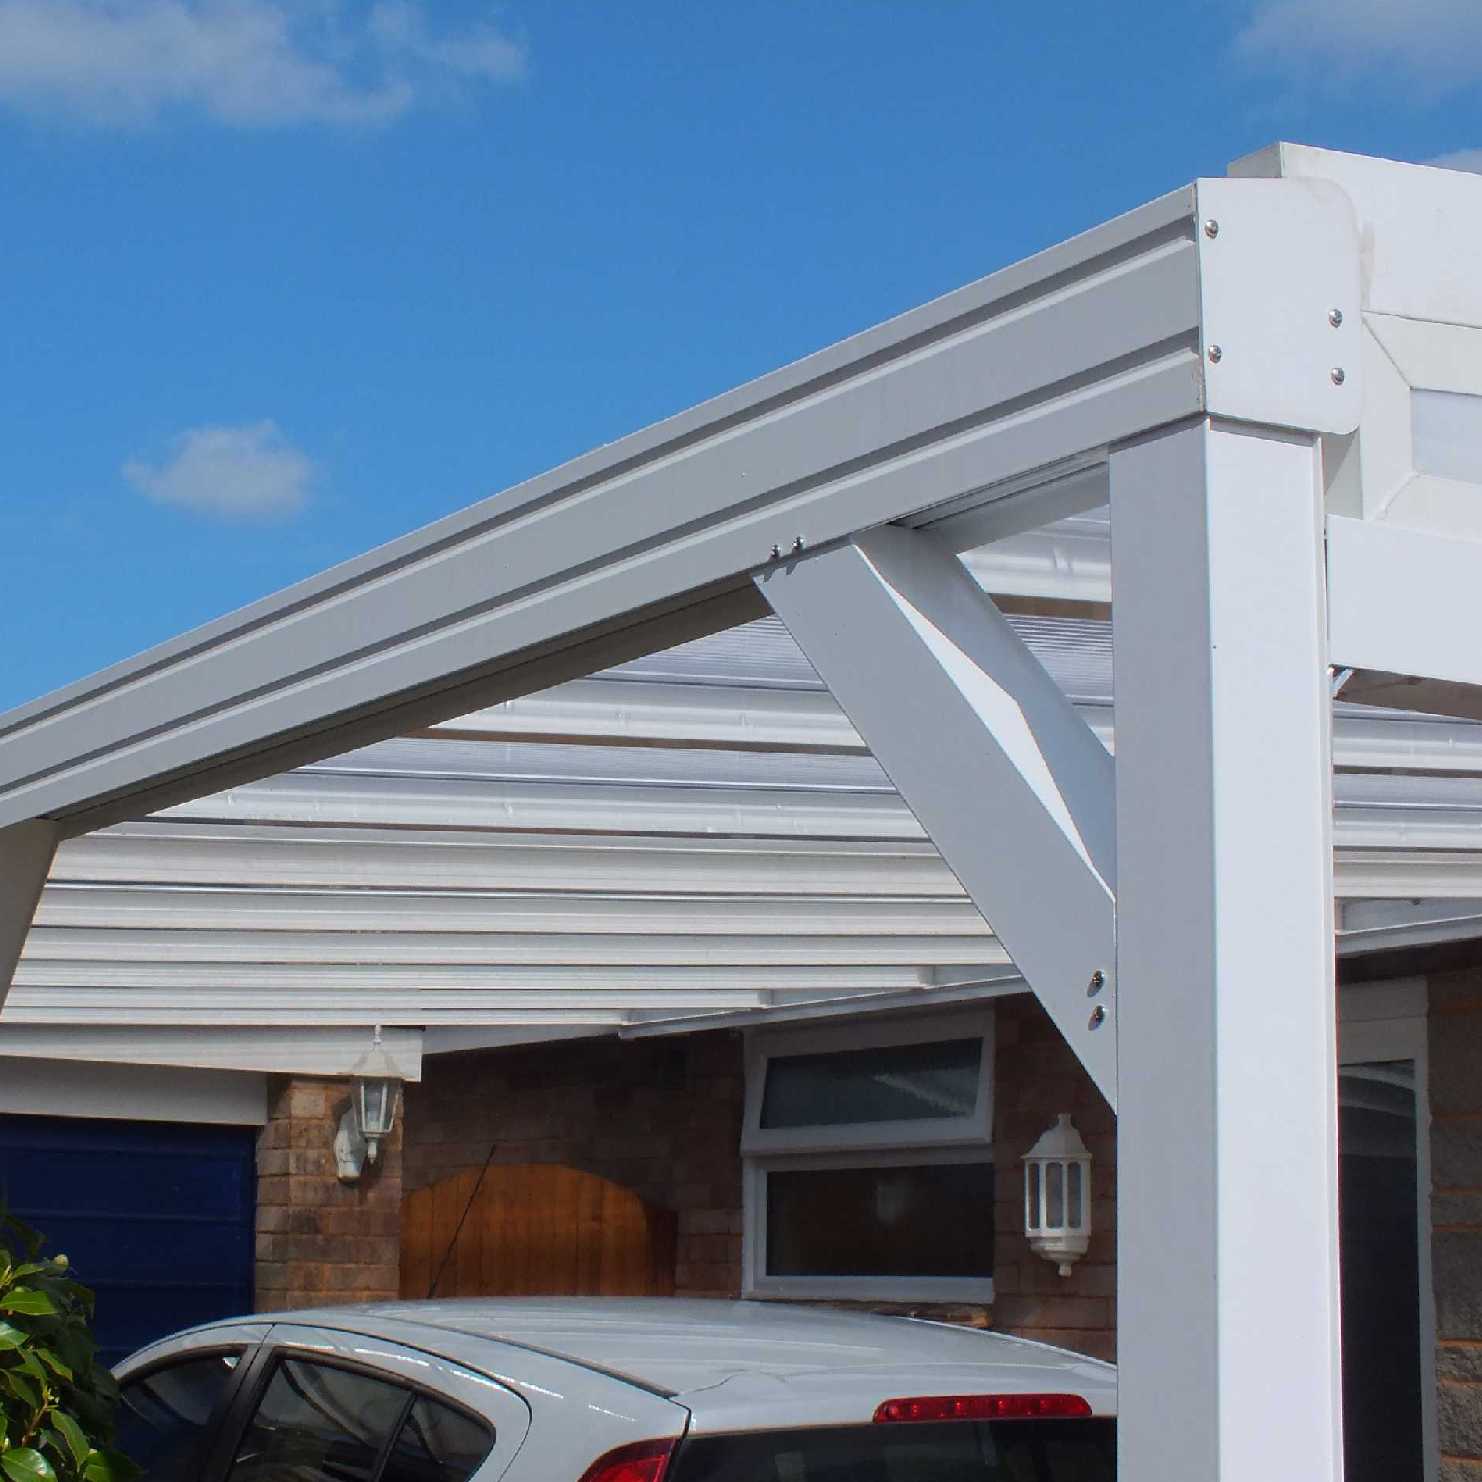 Buy Omega Smart Lean-To Canopy, White with 16mm Polycarbonate Glazing - 4.2m (W) x 3.5m (P), (3) Supporting Posts online today